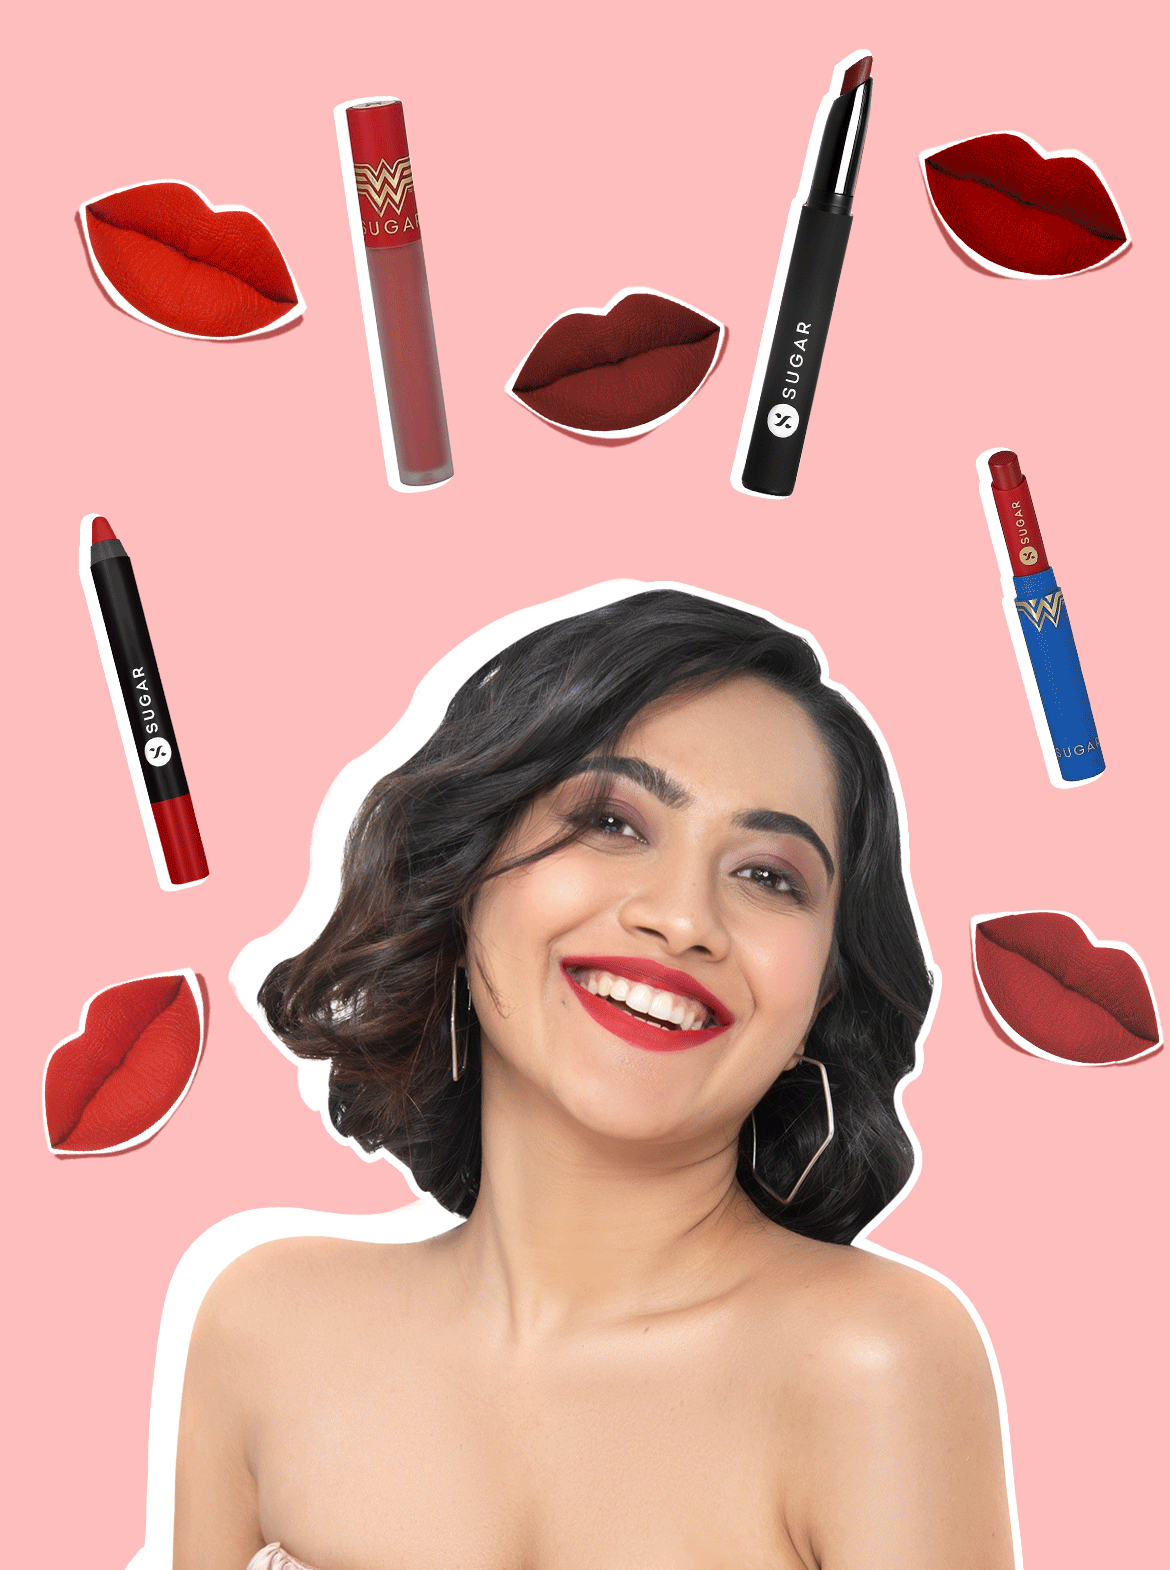 How To Pick A Red Lipstick For Your Skin Tone - SUGAR Cosmetics